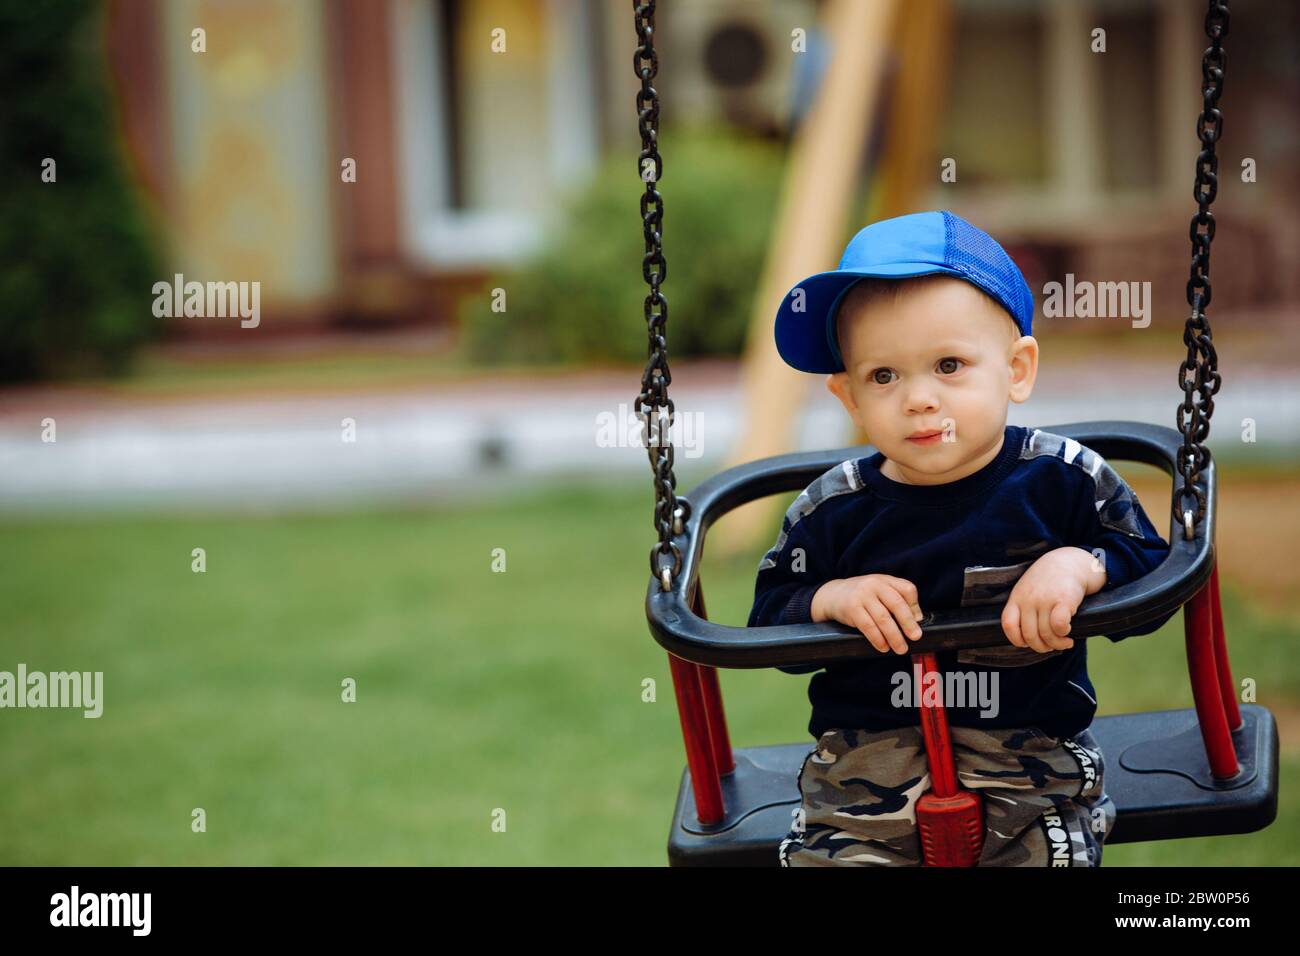 Handsome boy 1-2 years old, sitting on a swing, playground, close up Stock Photo